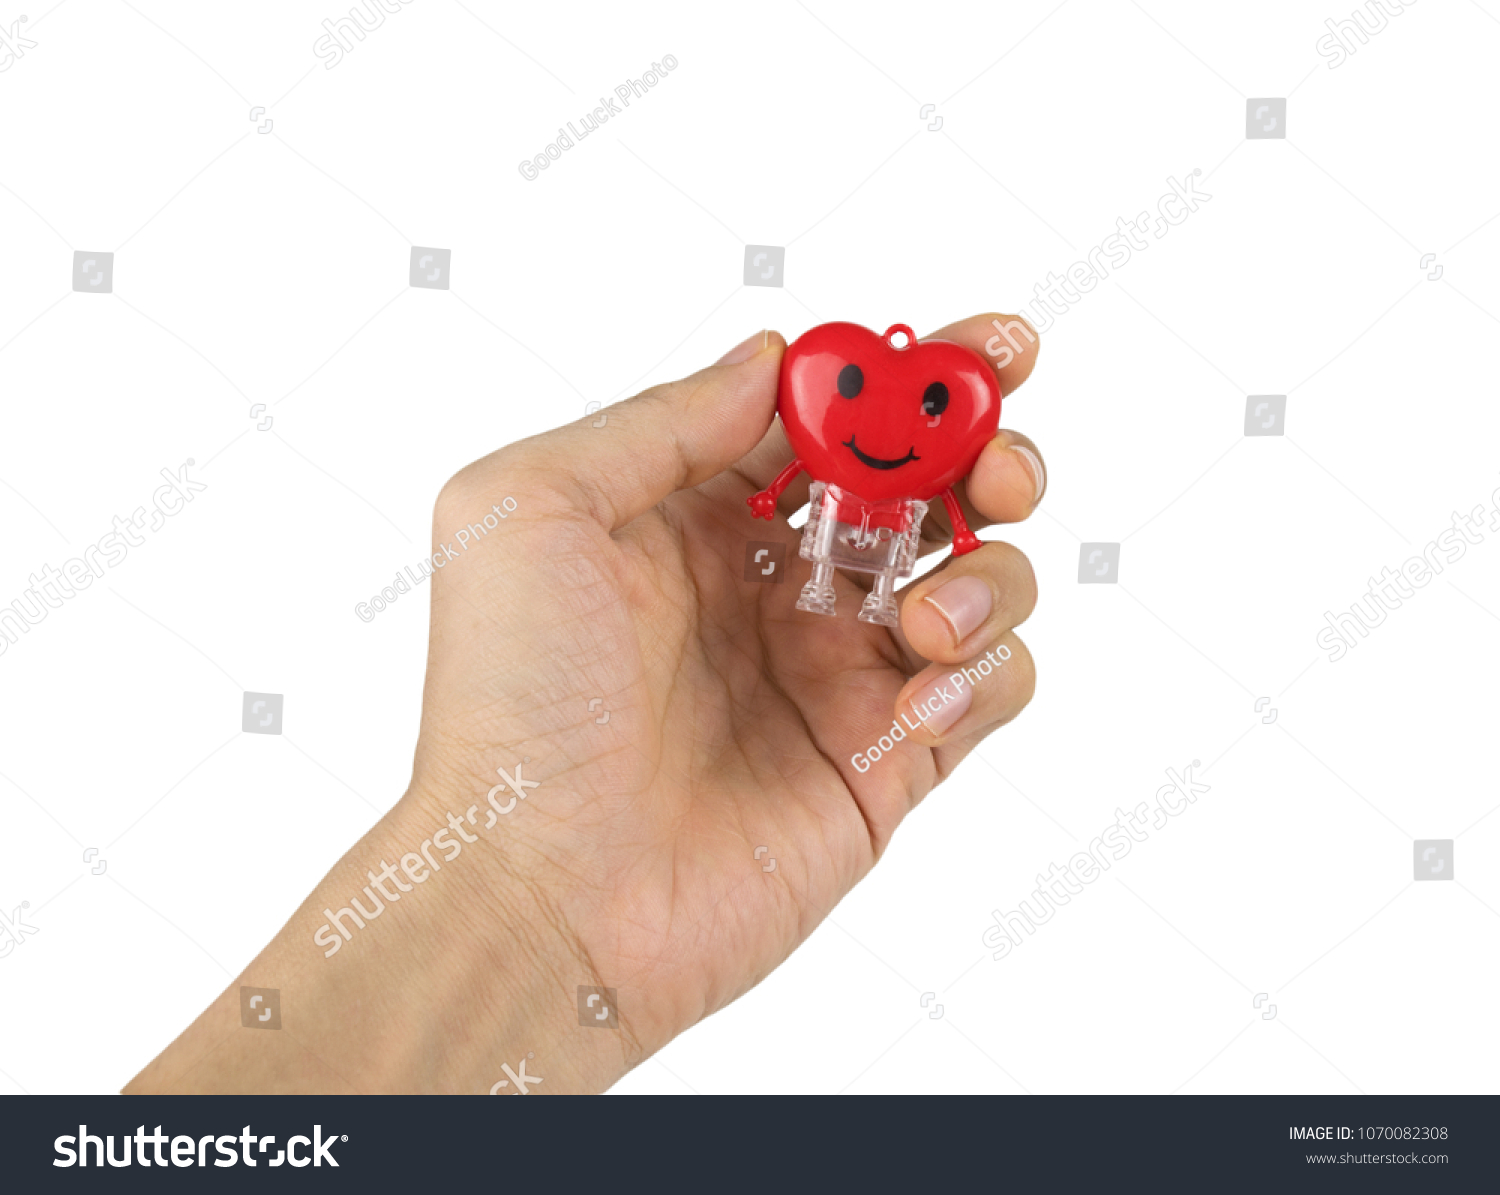 Heart red toy on hand isolated on white background with clipping path.Concept screening and care for the heart or valentine. #1070082308